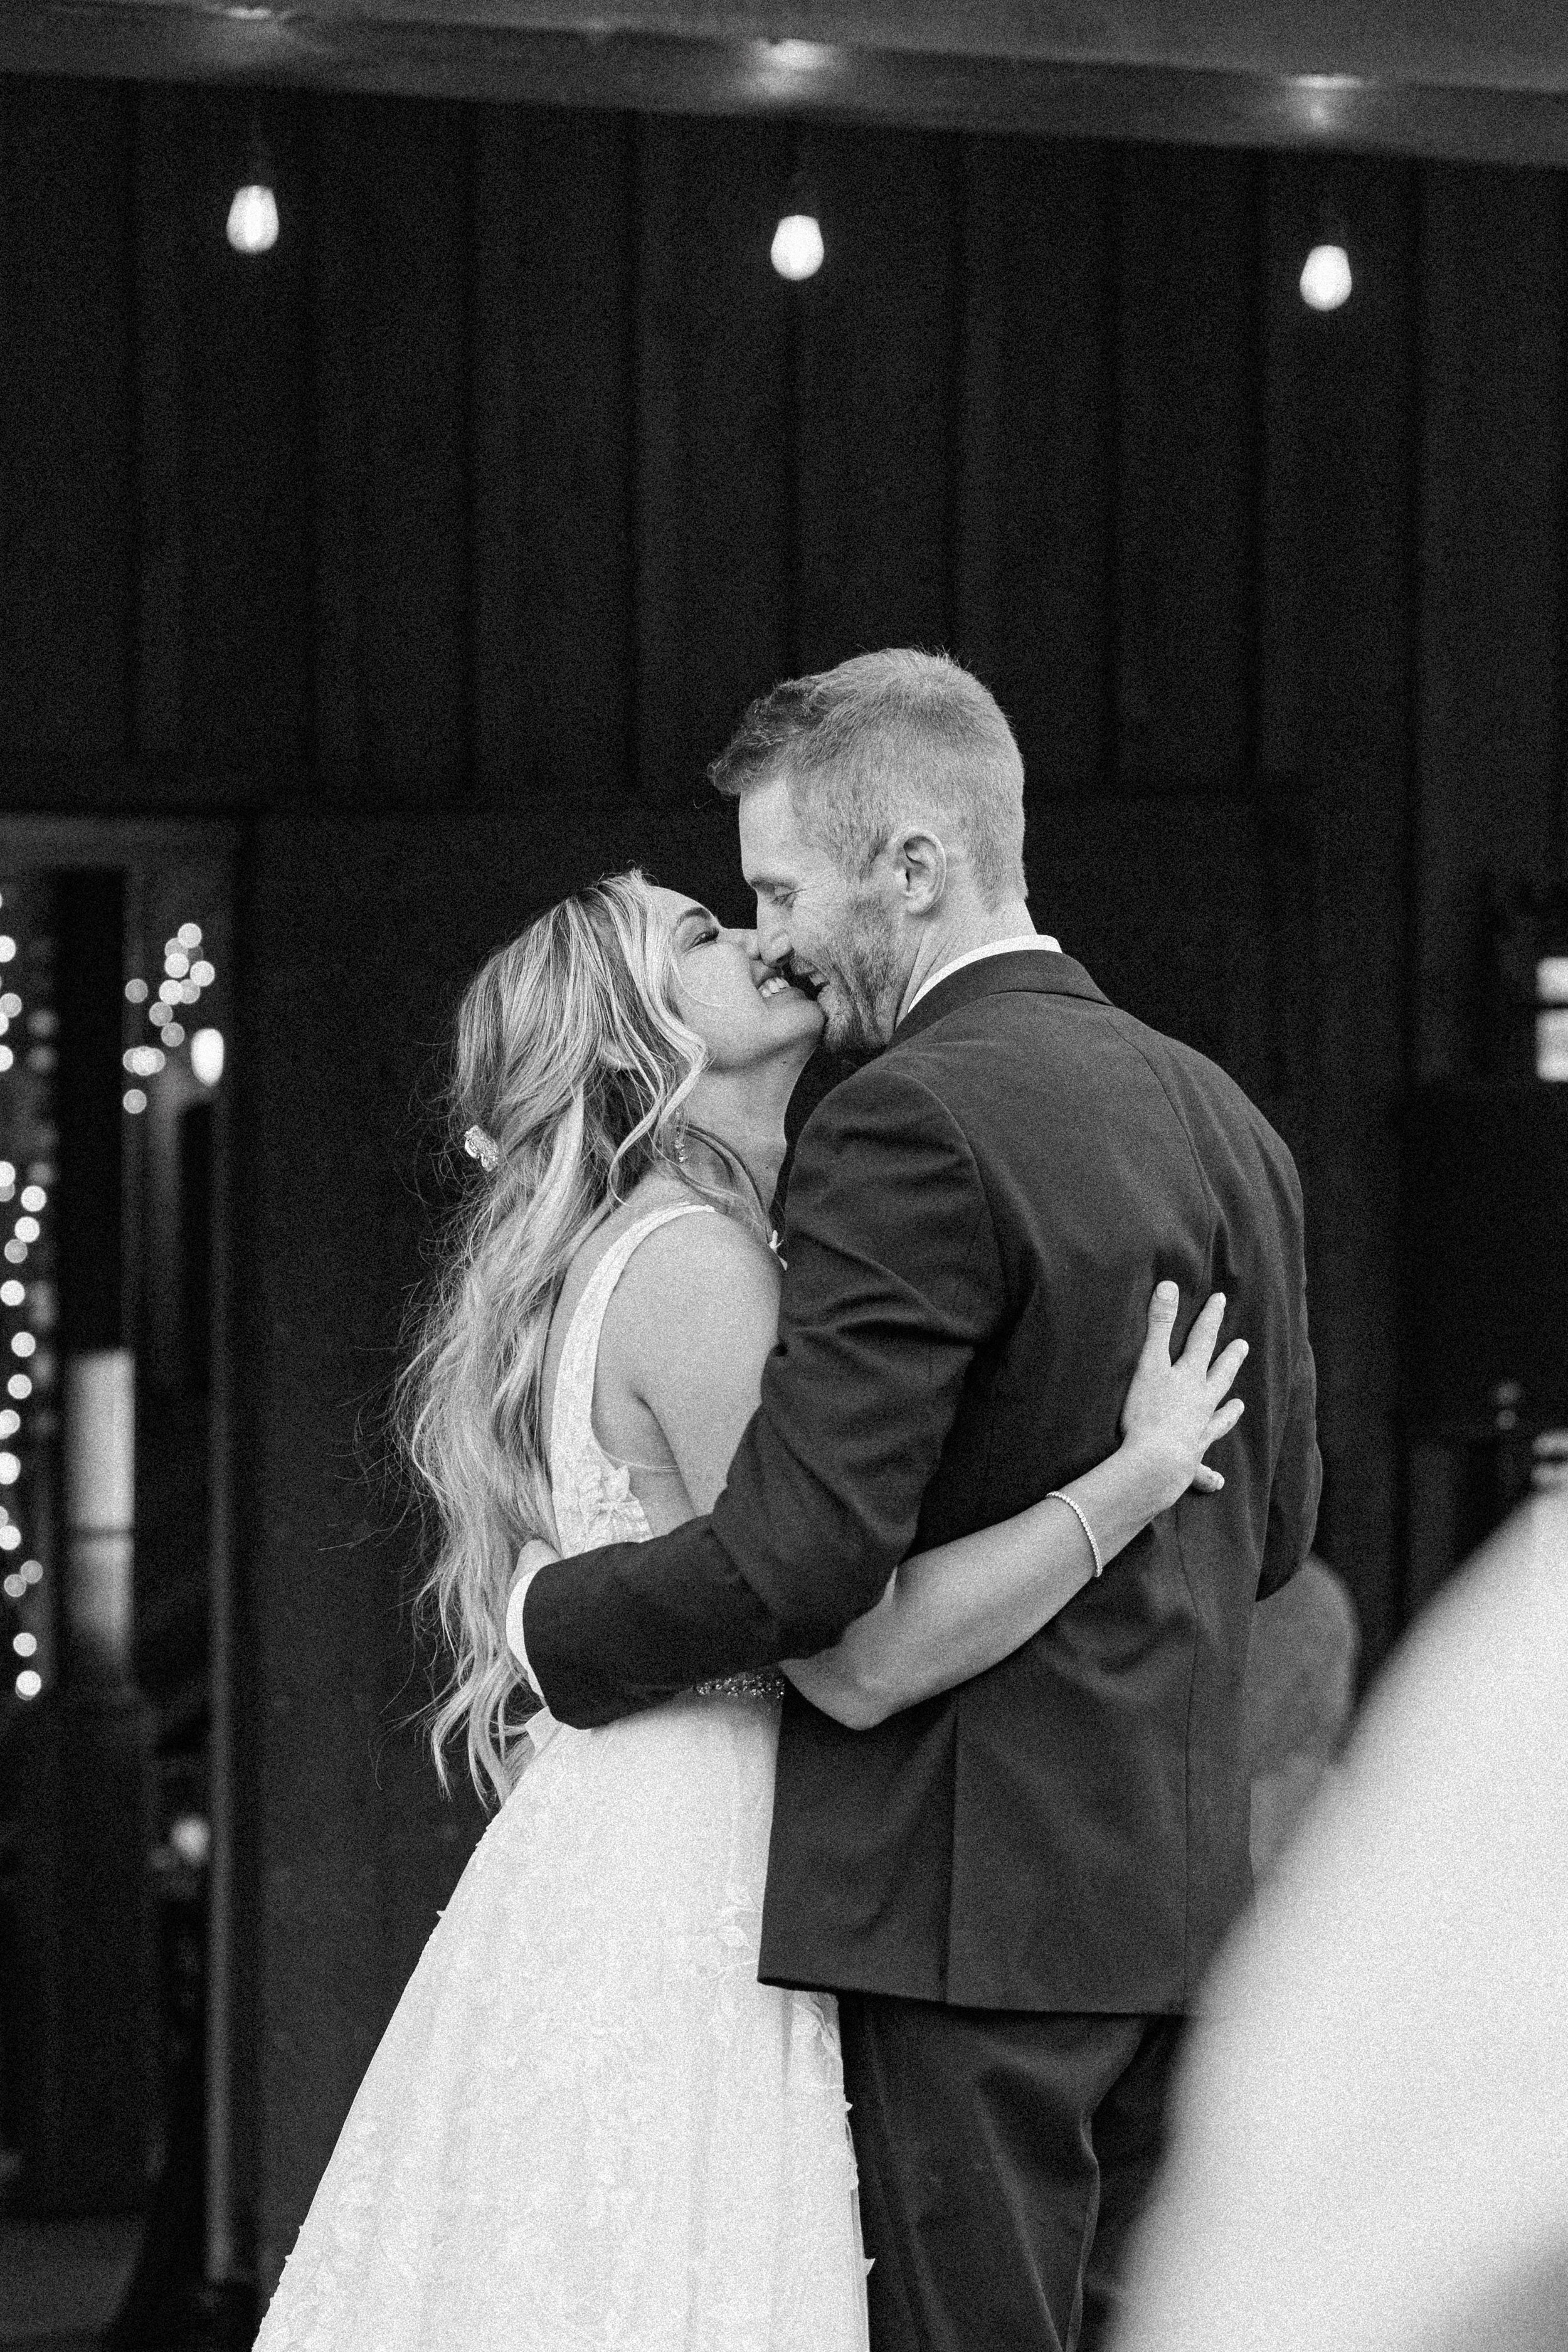  Savanna Richardson Photography captures a bride and groom kissing in a barn on their wedding day. black and white bridal portraits Utah #SavannaRichardsonPhotography #SavannaRichardsonWeddings #QuietMeadowFarms #MapletonUTweddingphotographers 